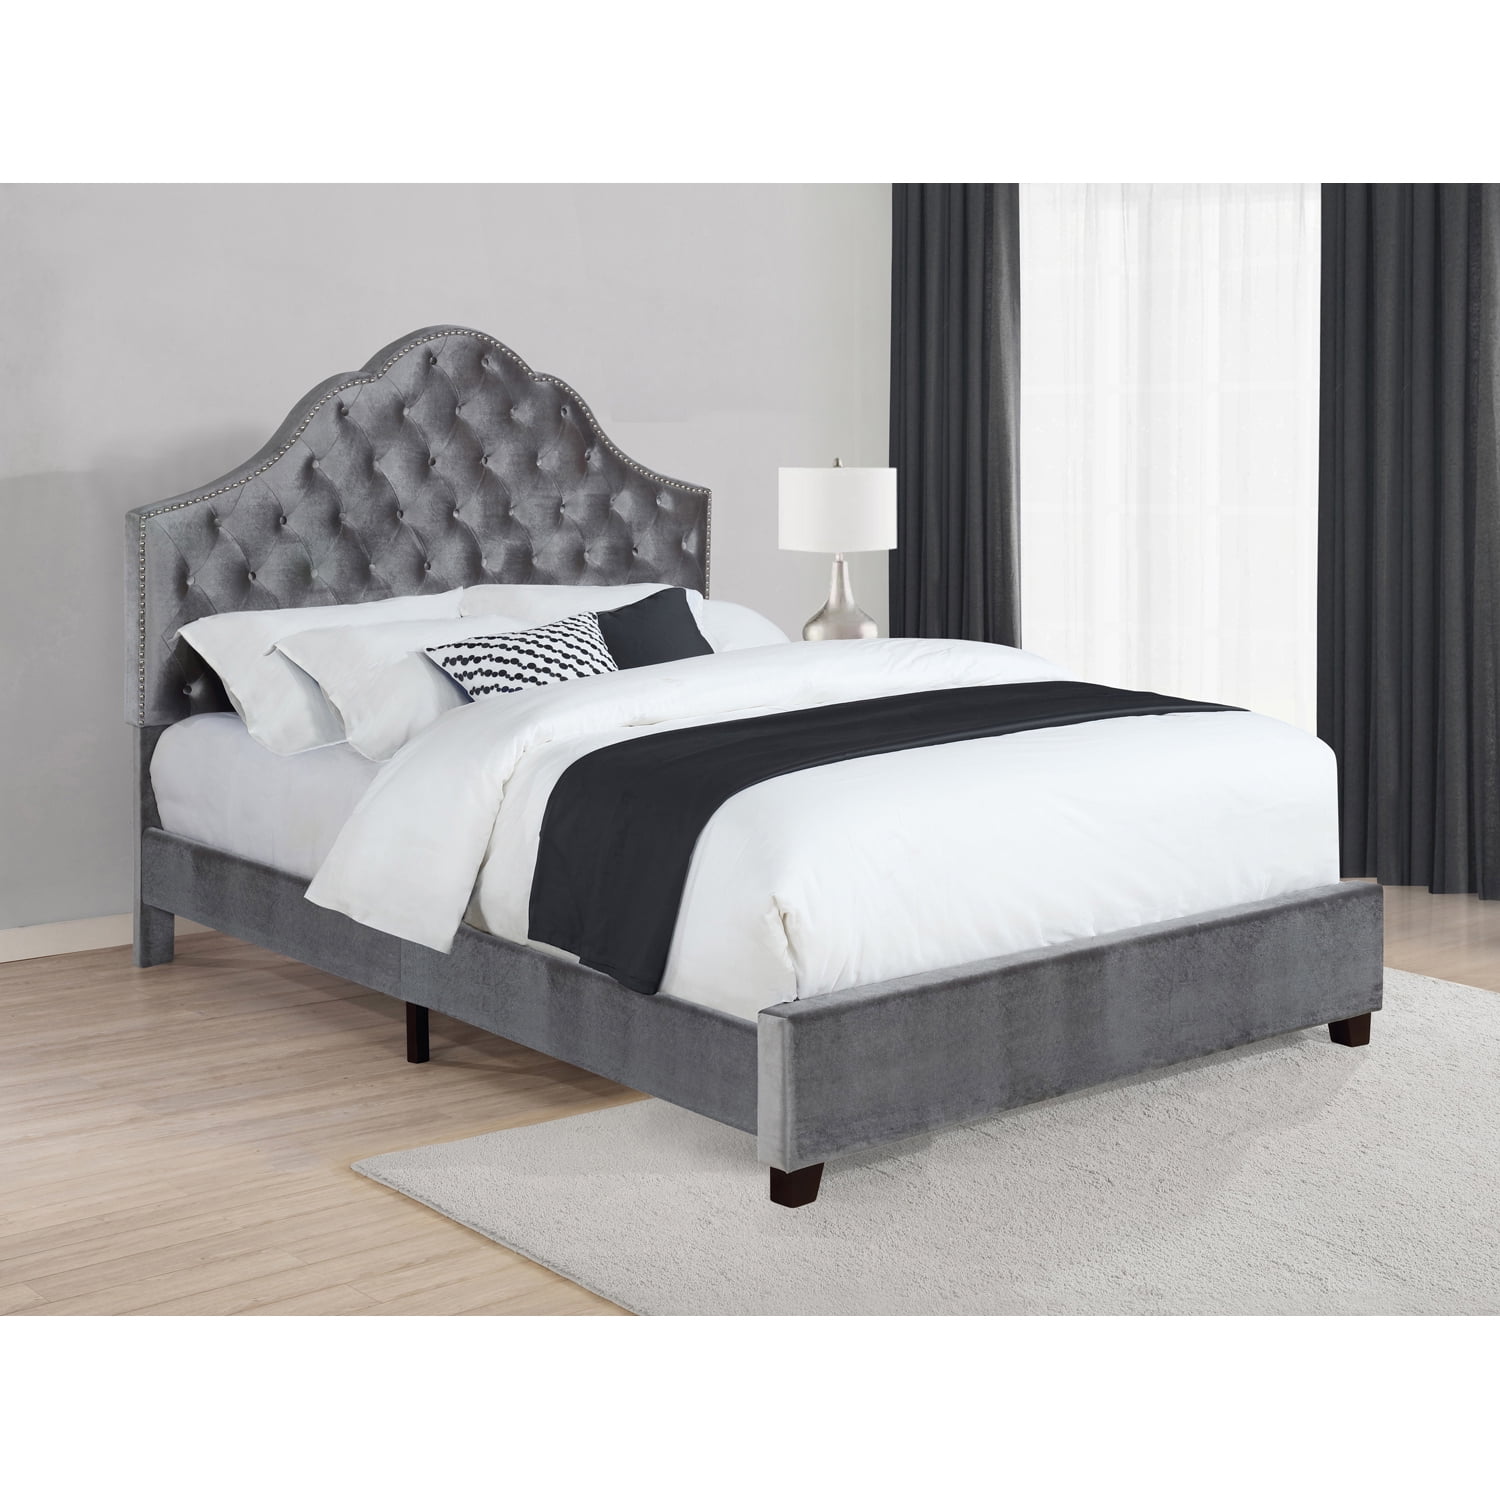 Leather Headboard Round Bed King T009, Modern White Leather Headboard Round Bed King Size